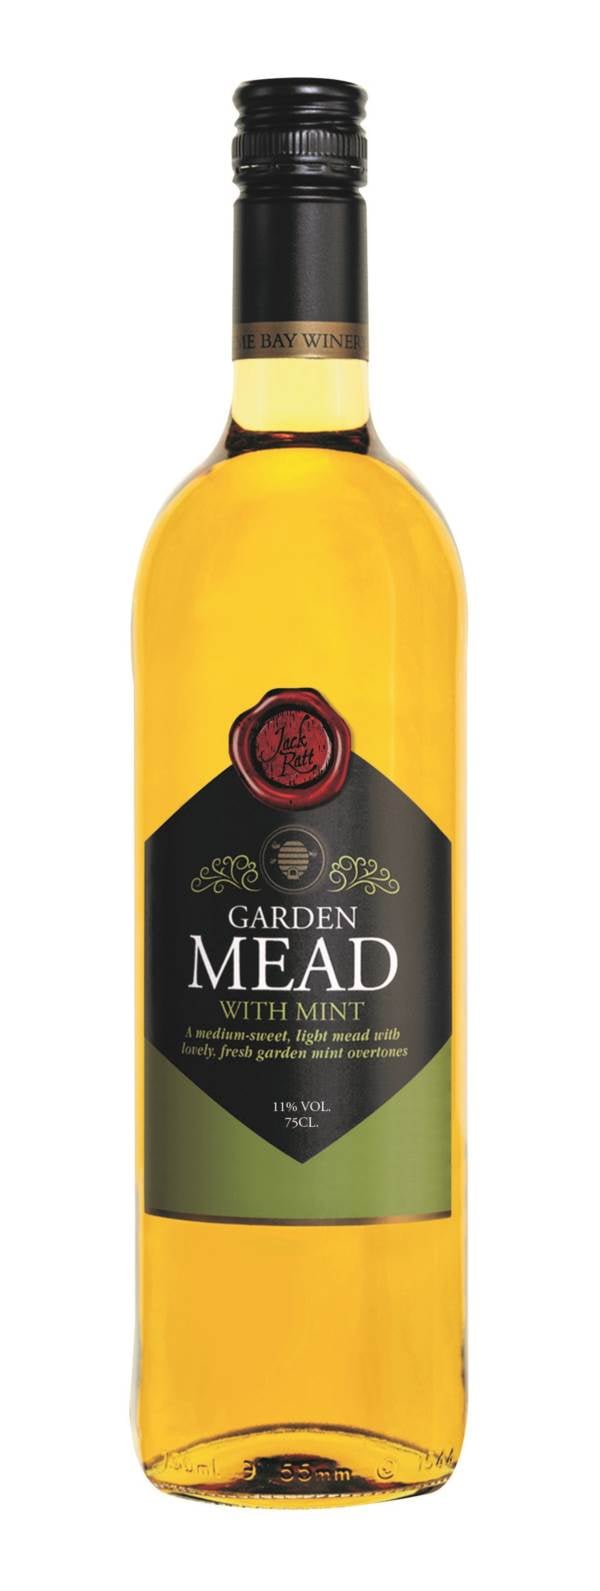 Lyme Bay Winery Garden Mead product image